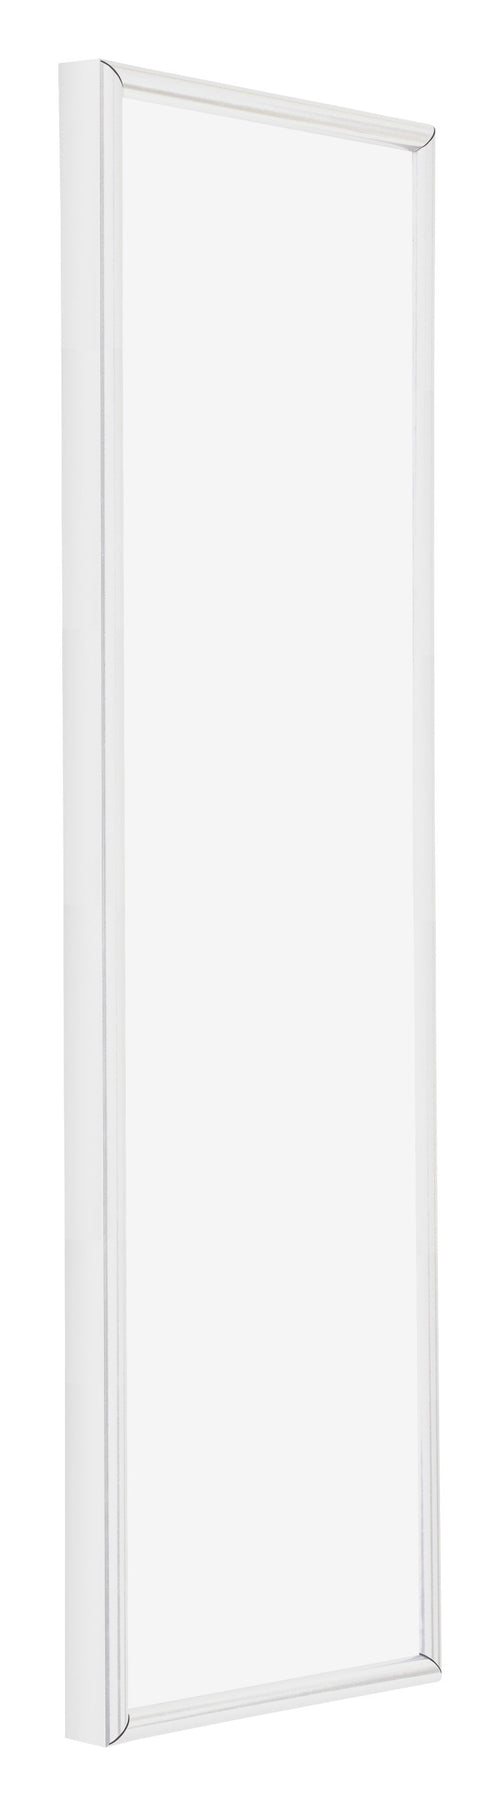 Annecy Plastic Photo Frame 20x60cm White High Gloss Front Oblique | Yourdecoration.co.uk